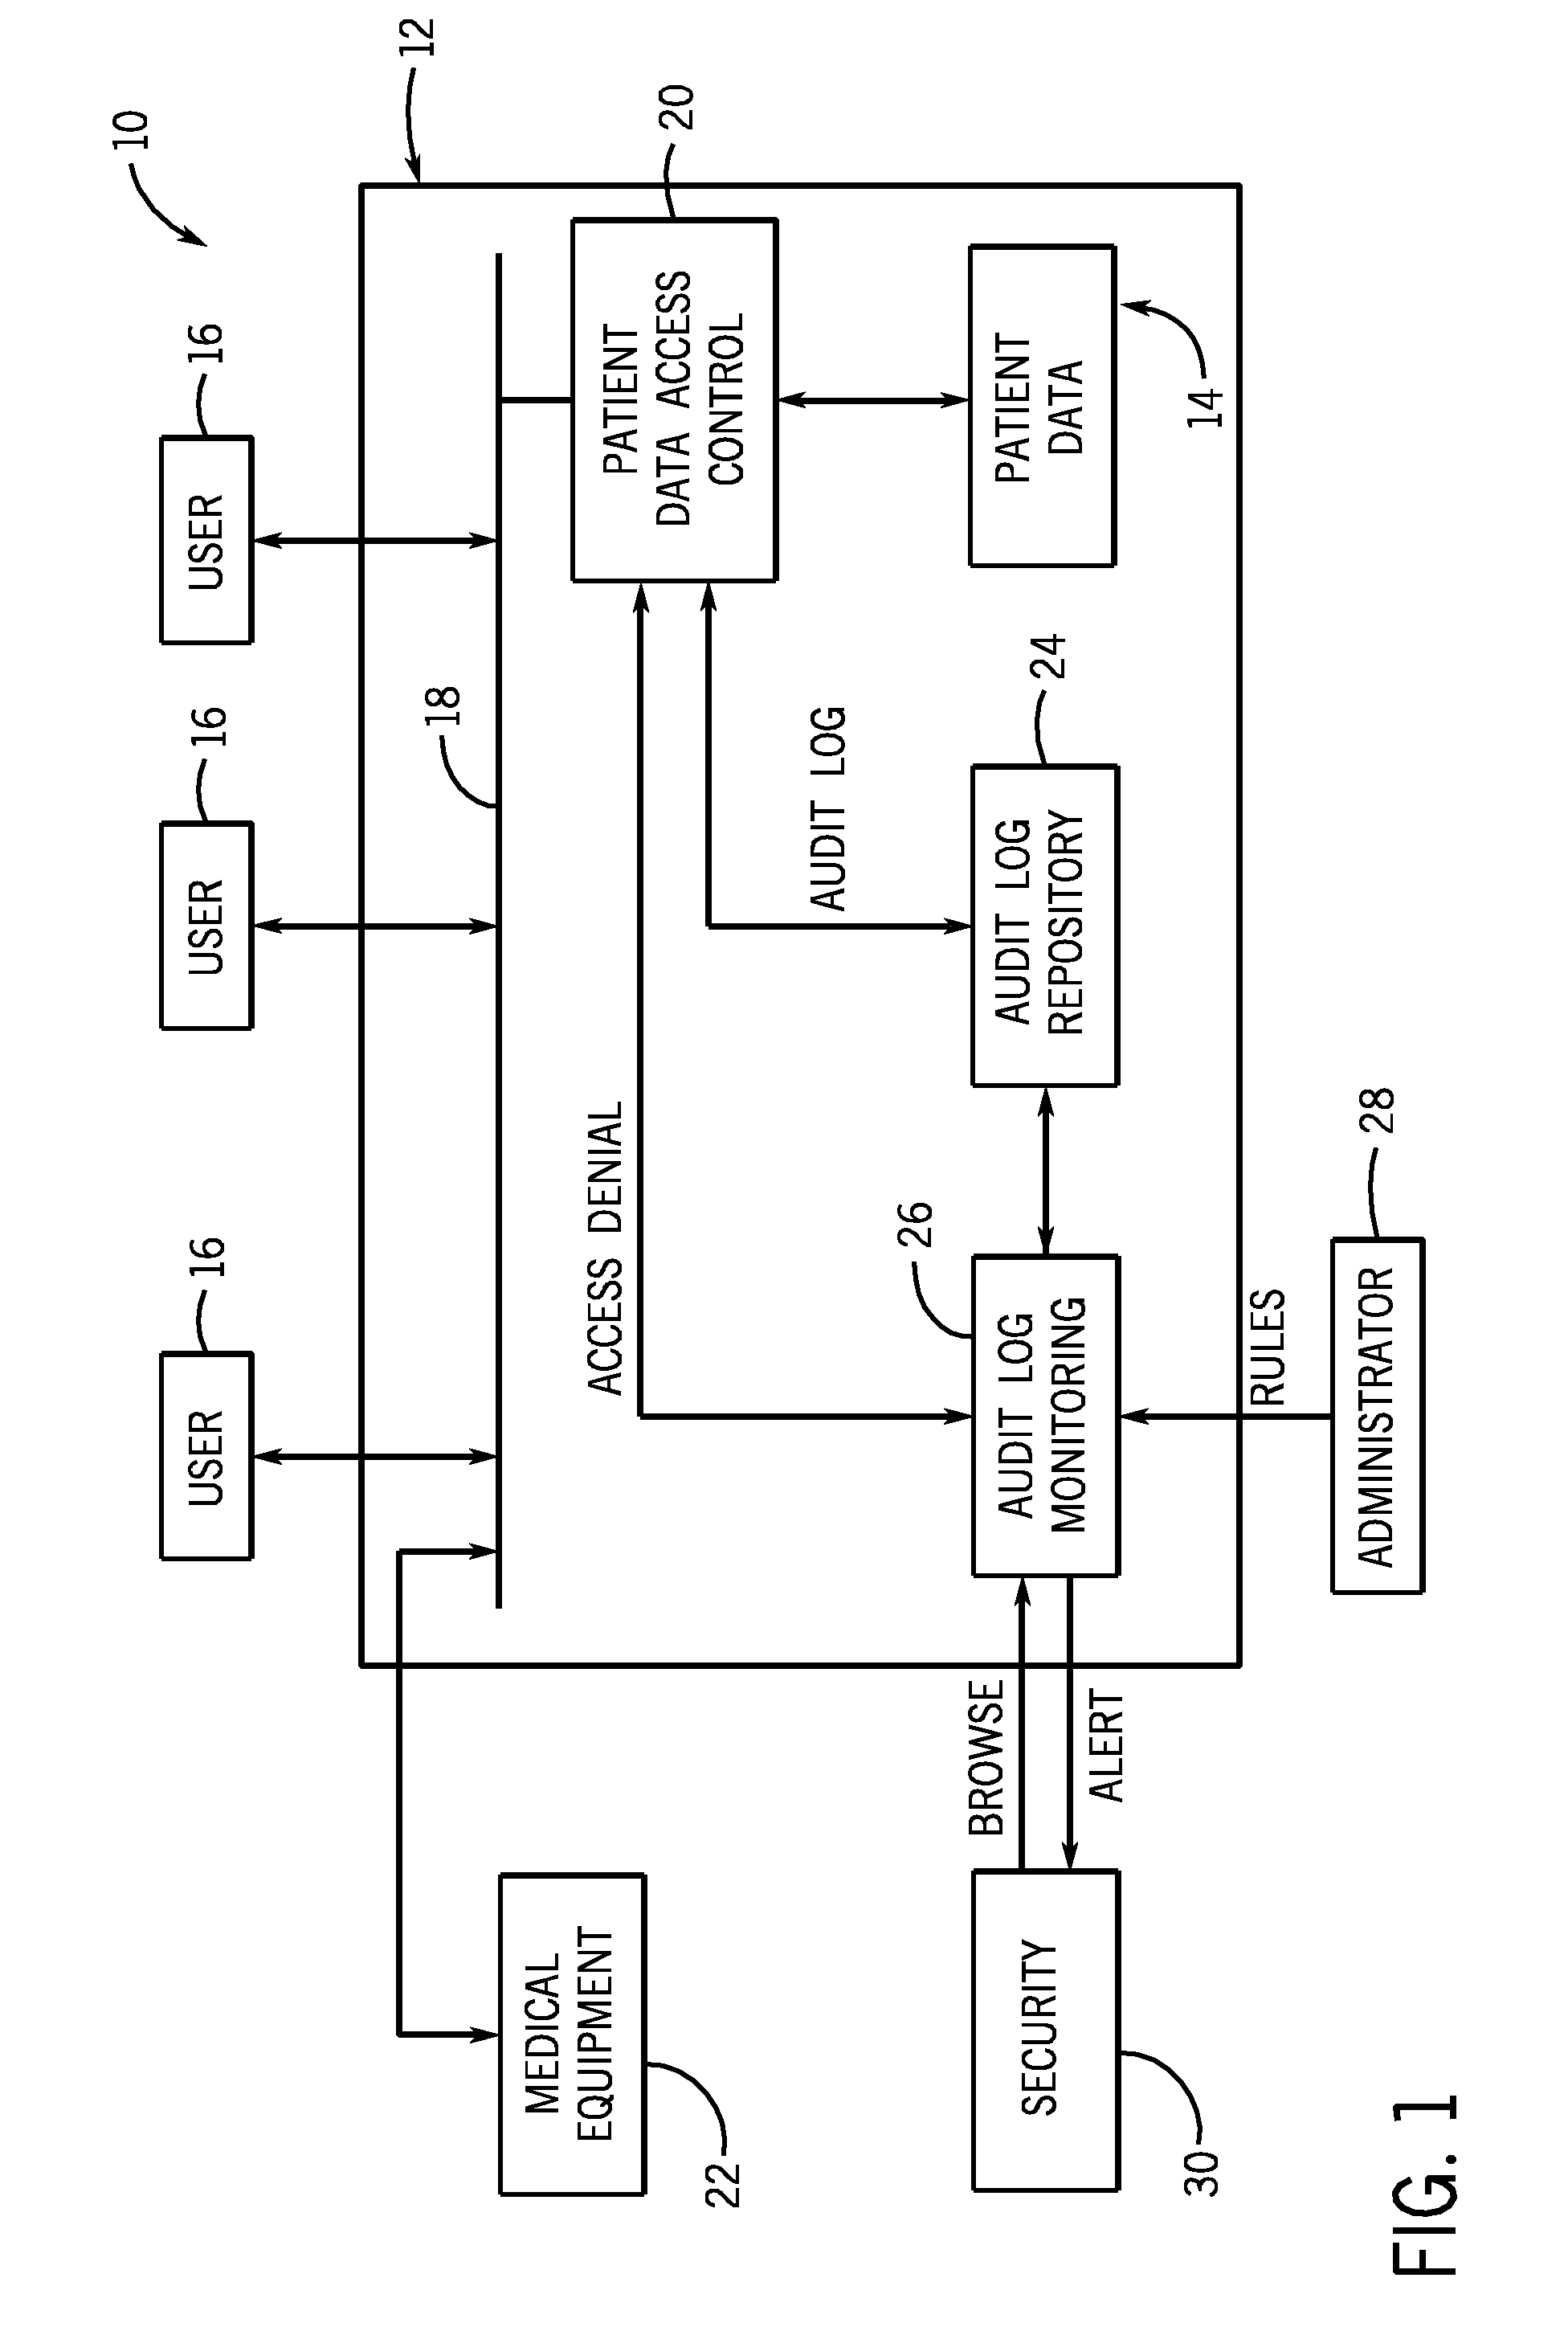 System and method for detection of abuse of patient data